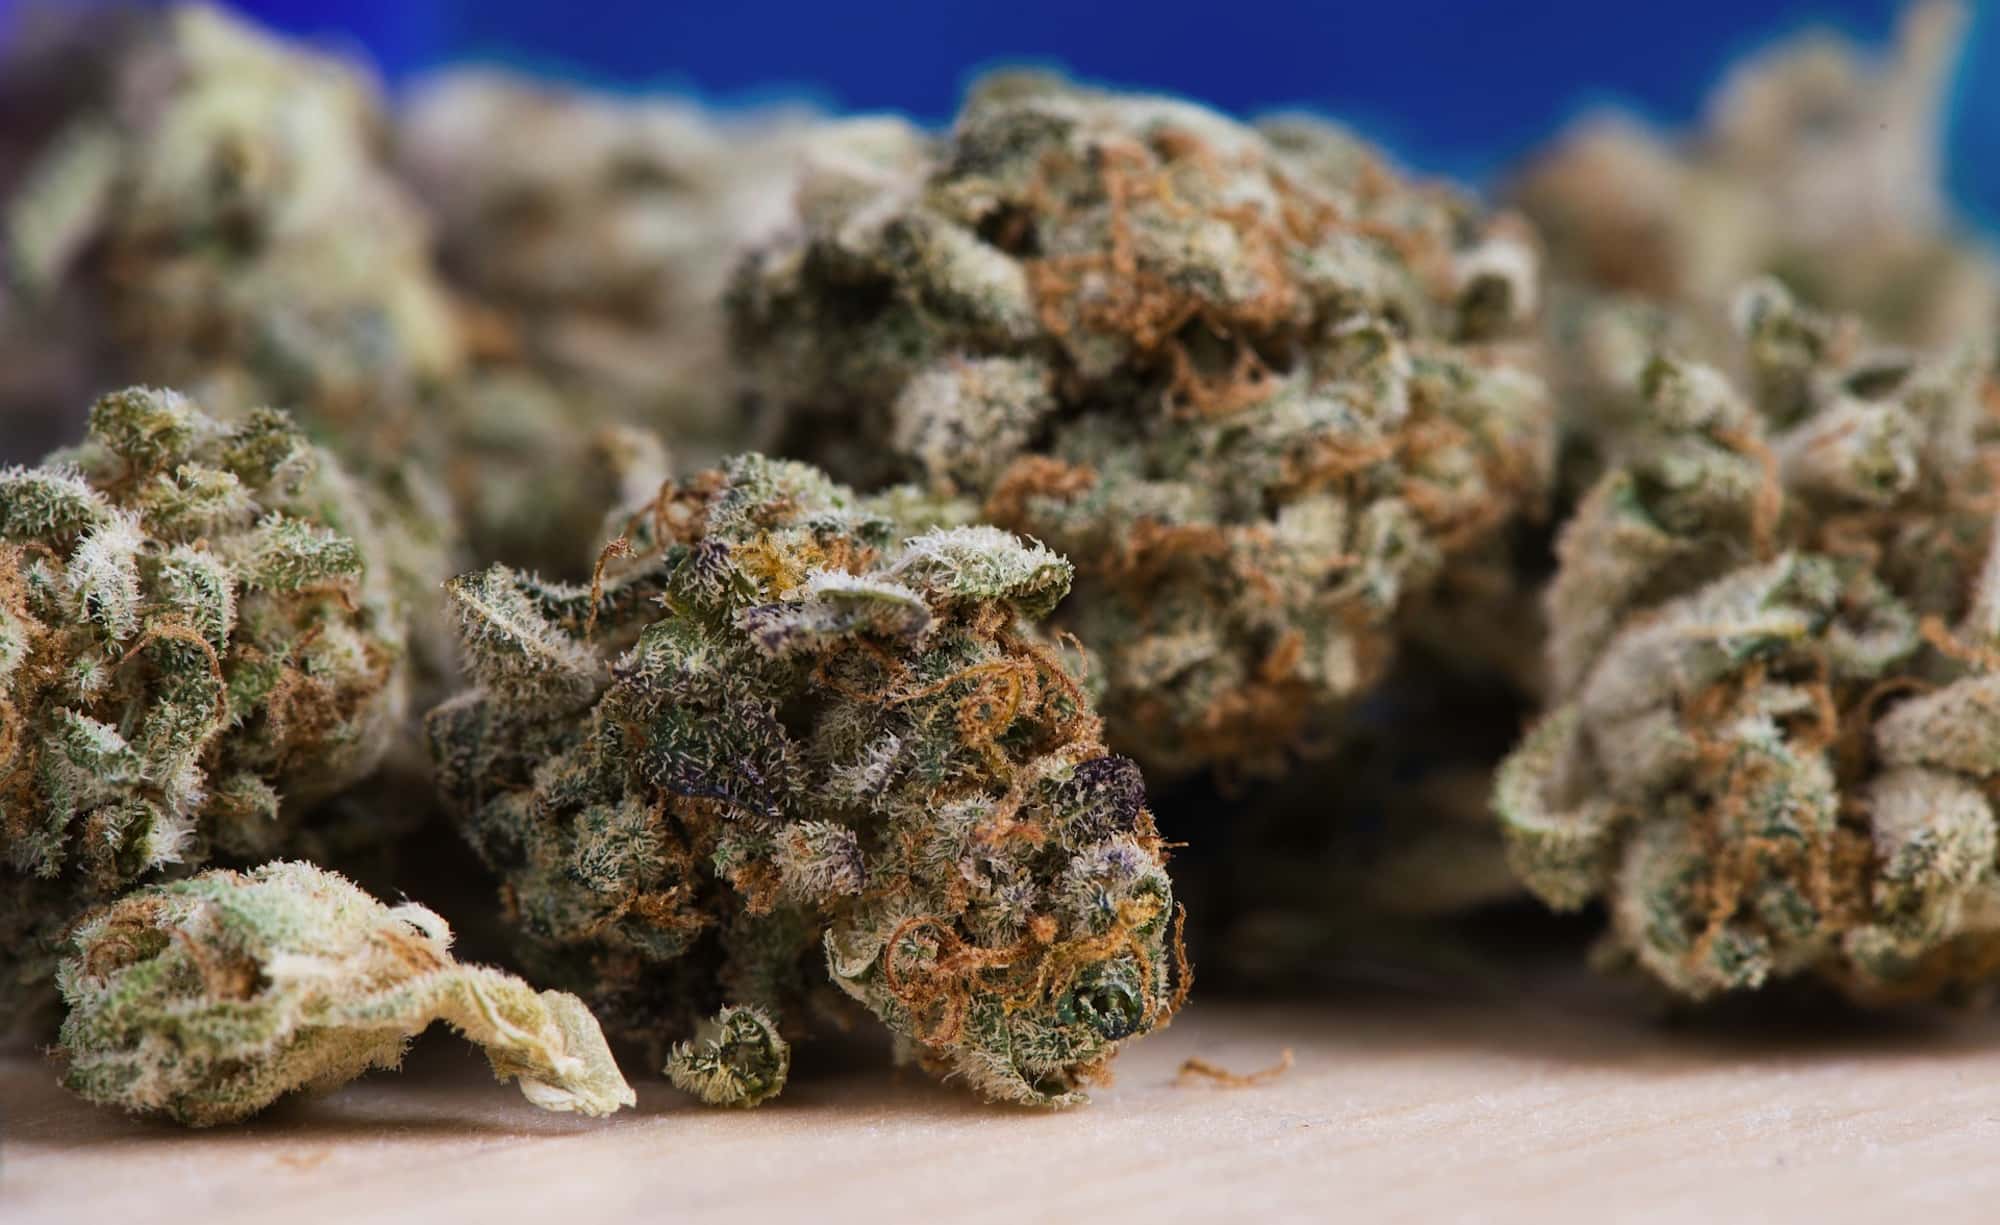 New Study Finds Cannabis Strain Labeling Is Frequently Inaccurate